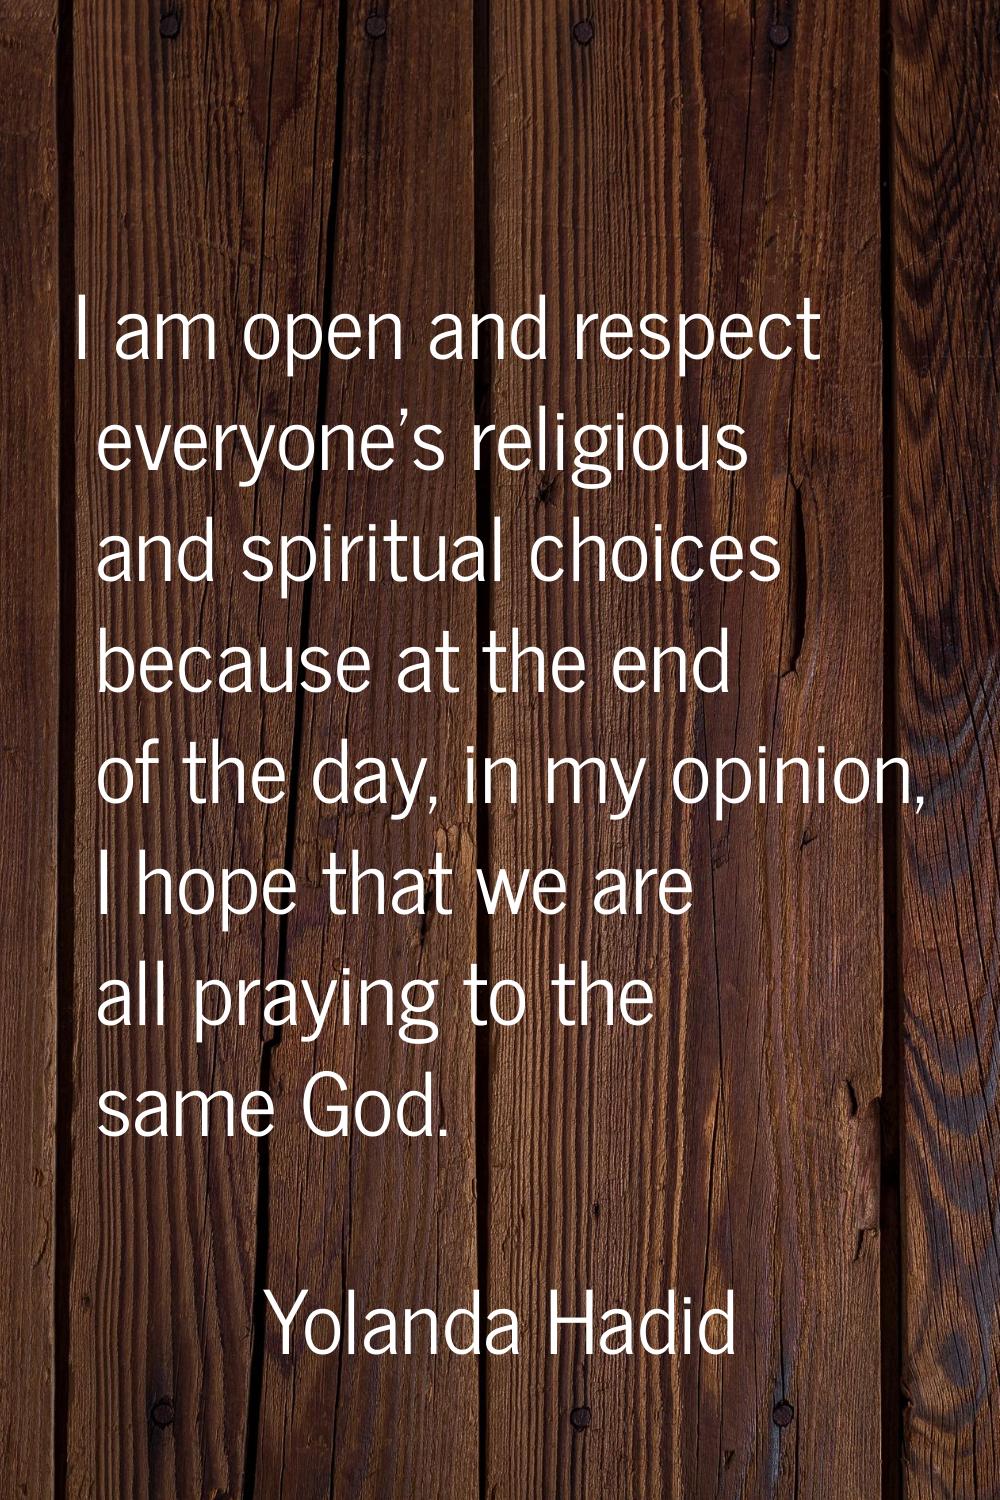 I am open and respect everyone's religious and spiritual choices because at the end of the day, in 